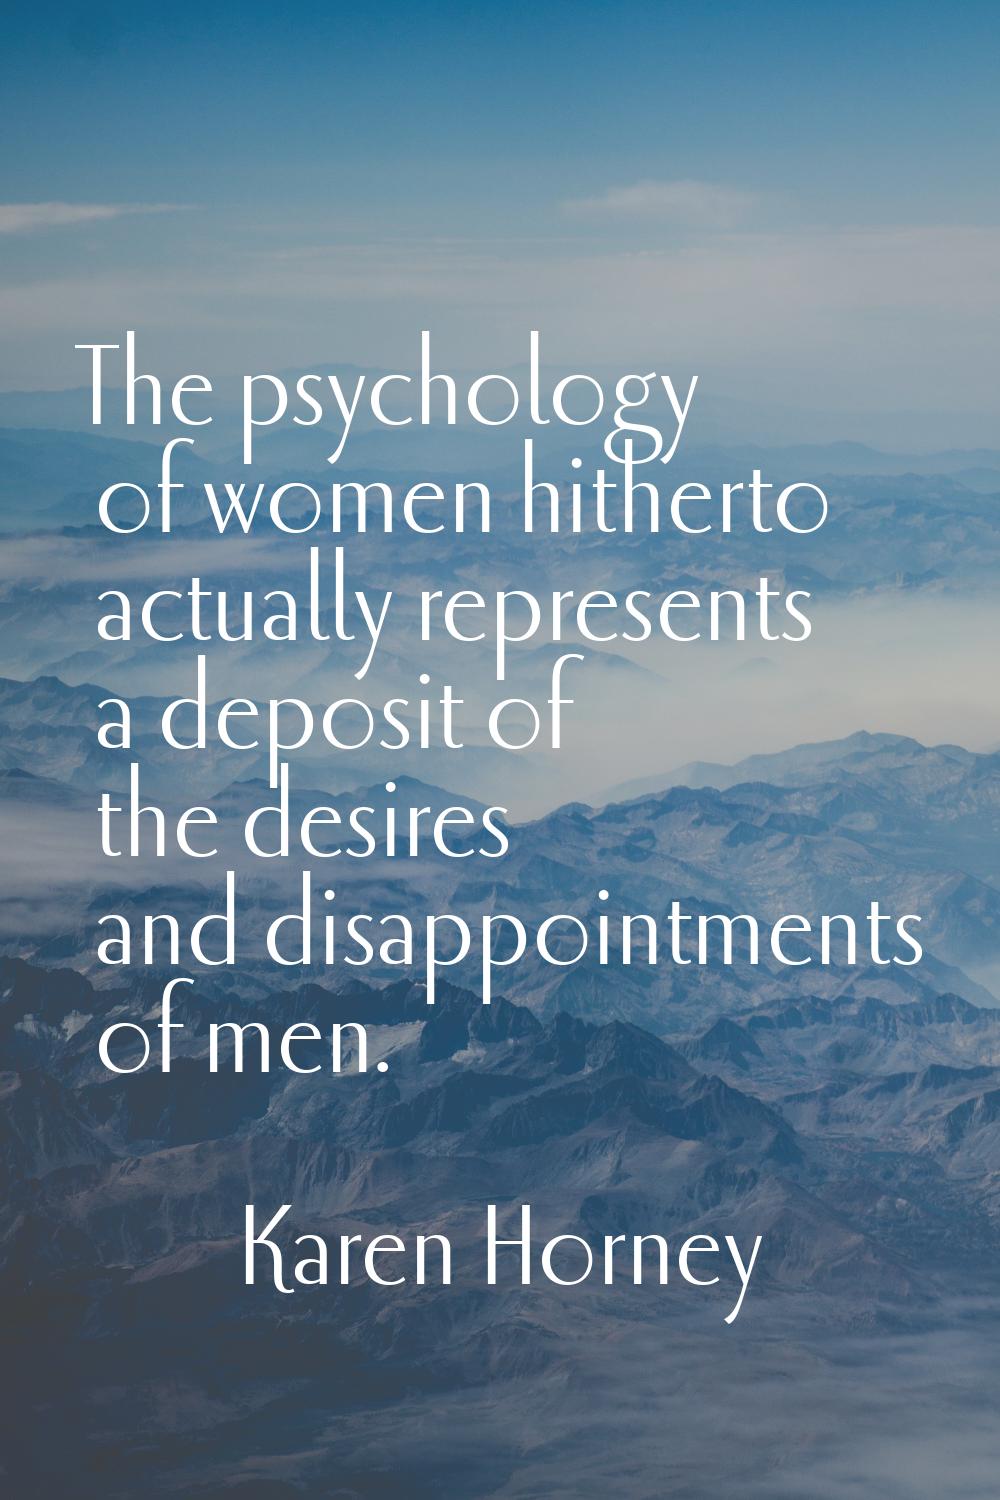 The psychology of women hitherto actually represents a deposit of the desires and disappointments o